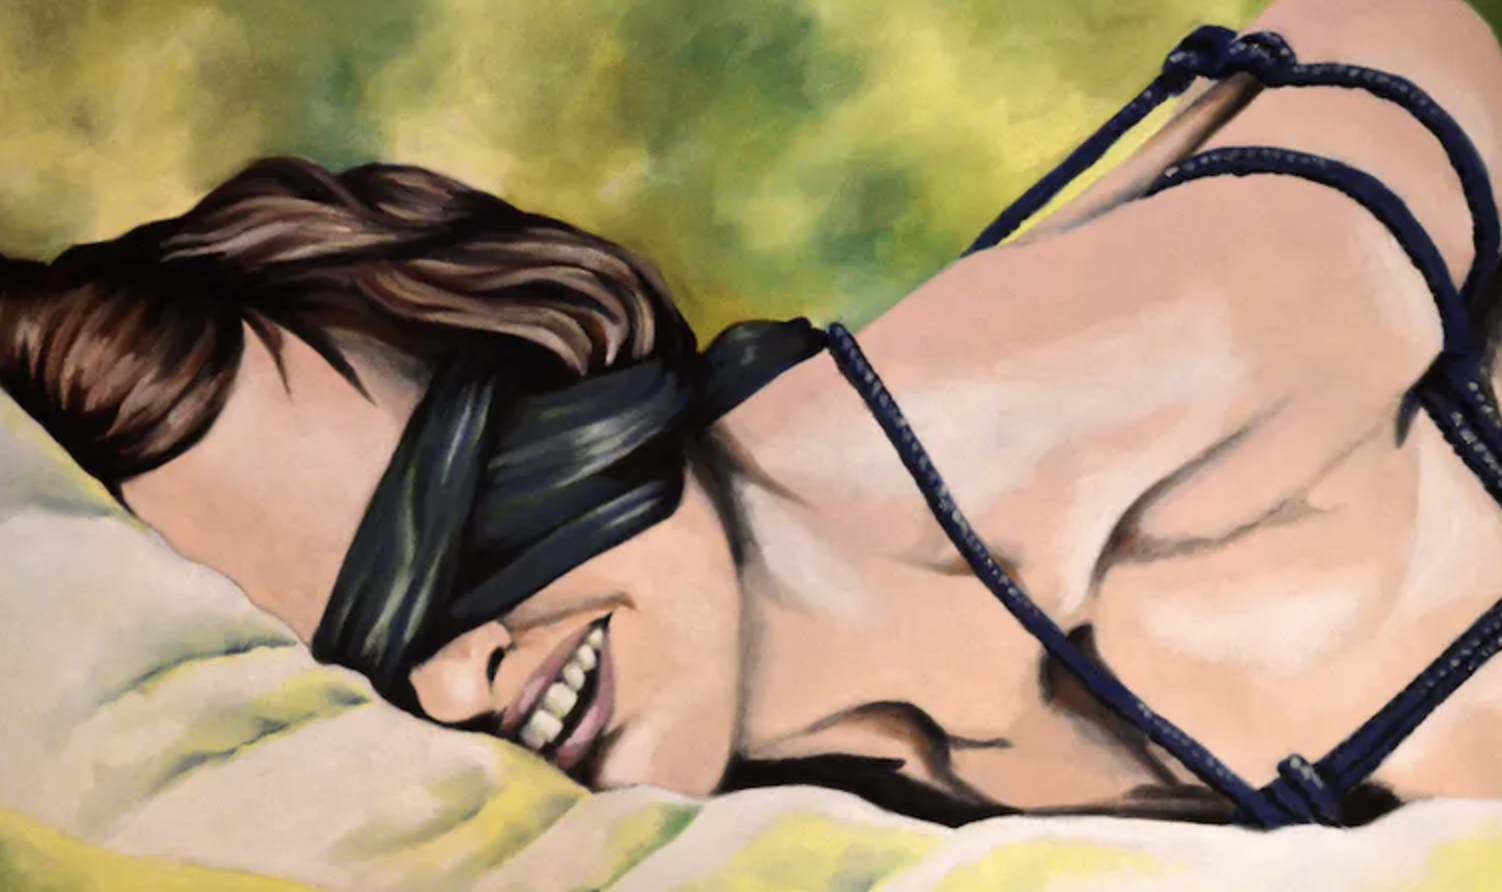 Using soft pastels, charcoal and ink Nadia Vanilla drew this image of a woman tied up with black rope wearing a black silk blindfold and laughing as she is face down on a bed. Presumably partaking in tickle sex.